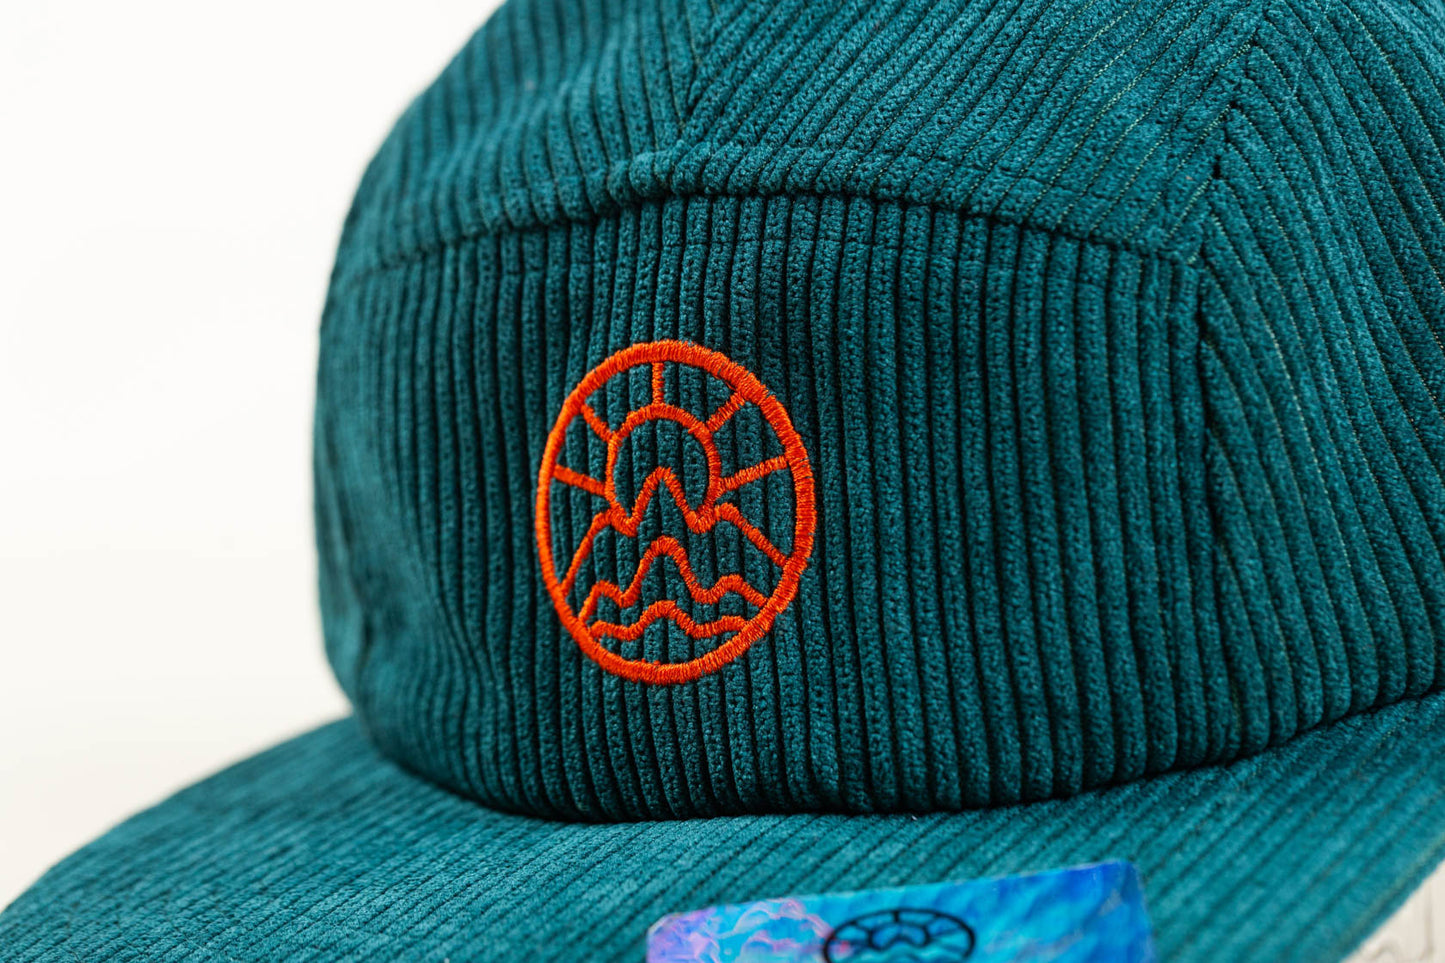 Orange McClumsy logo embroidered on a Rich Green Corduroy 5 Panel McClumsy Hat